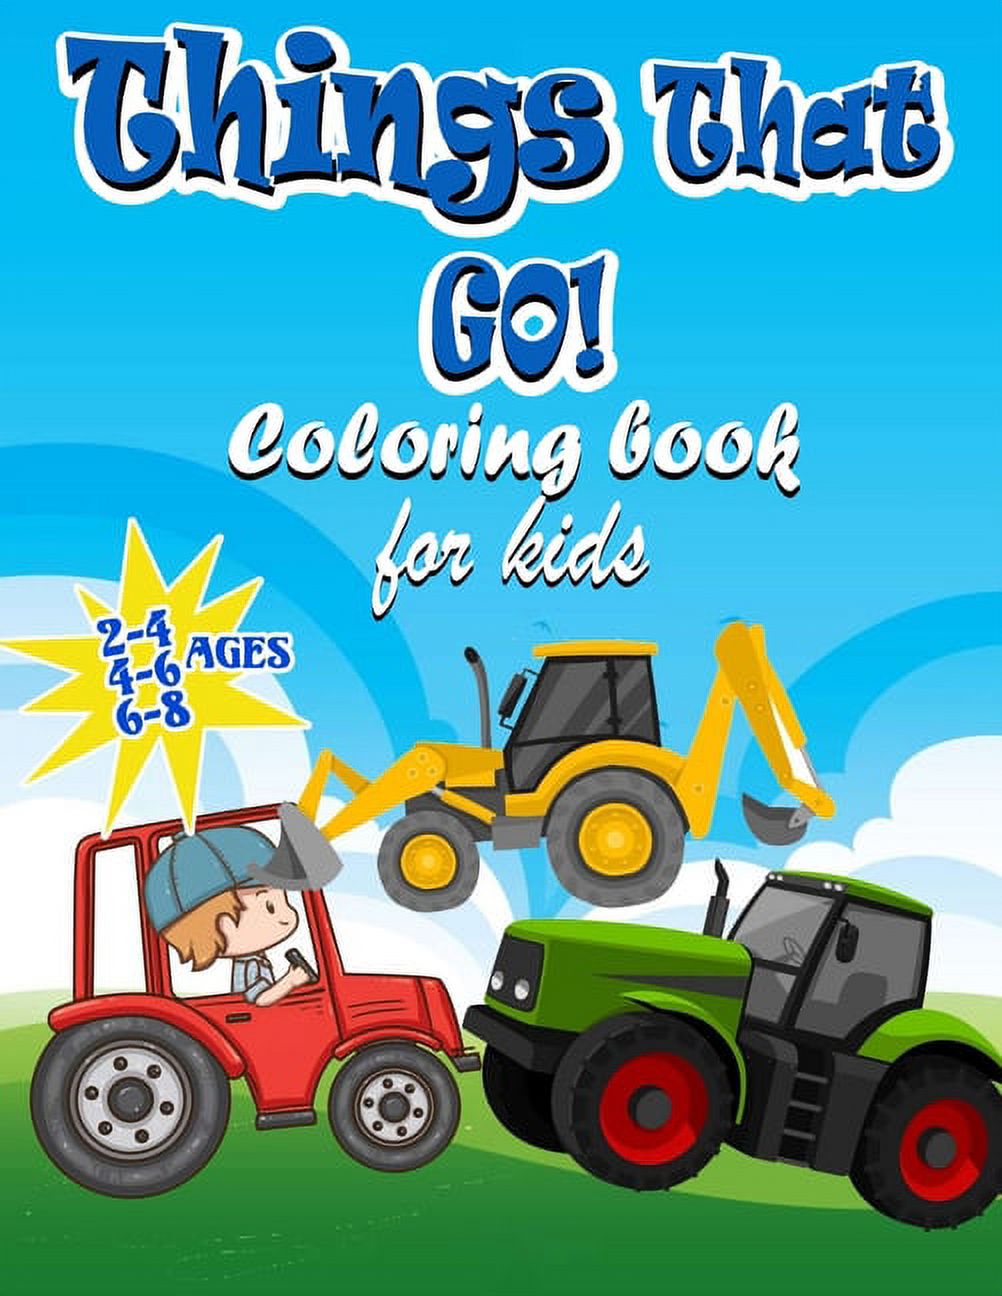 Things That GO! Coloring Book For kids Ages 2-4 4-6 6-8: Fun and Educational Coloring Book for Kids Ages Ages 2-4 4-6 6-8, Big And Fun Coloring pages of things that go: of things that go: Planes, Truc - image 1 of 1